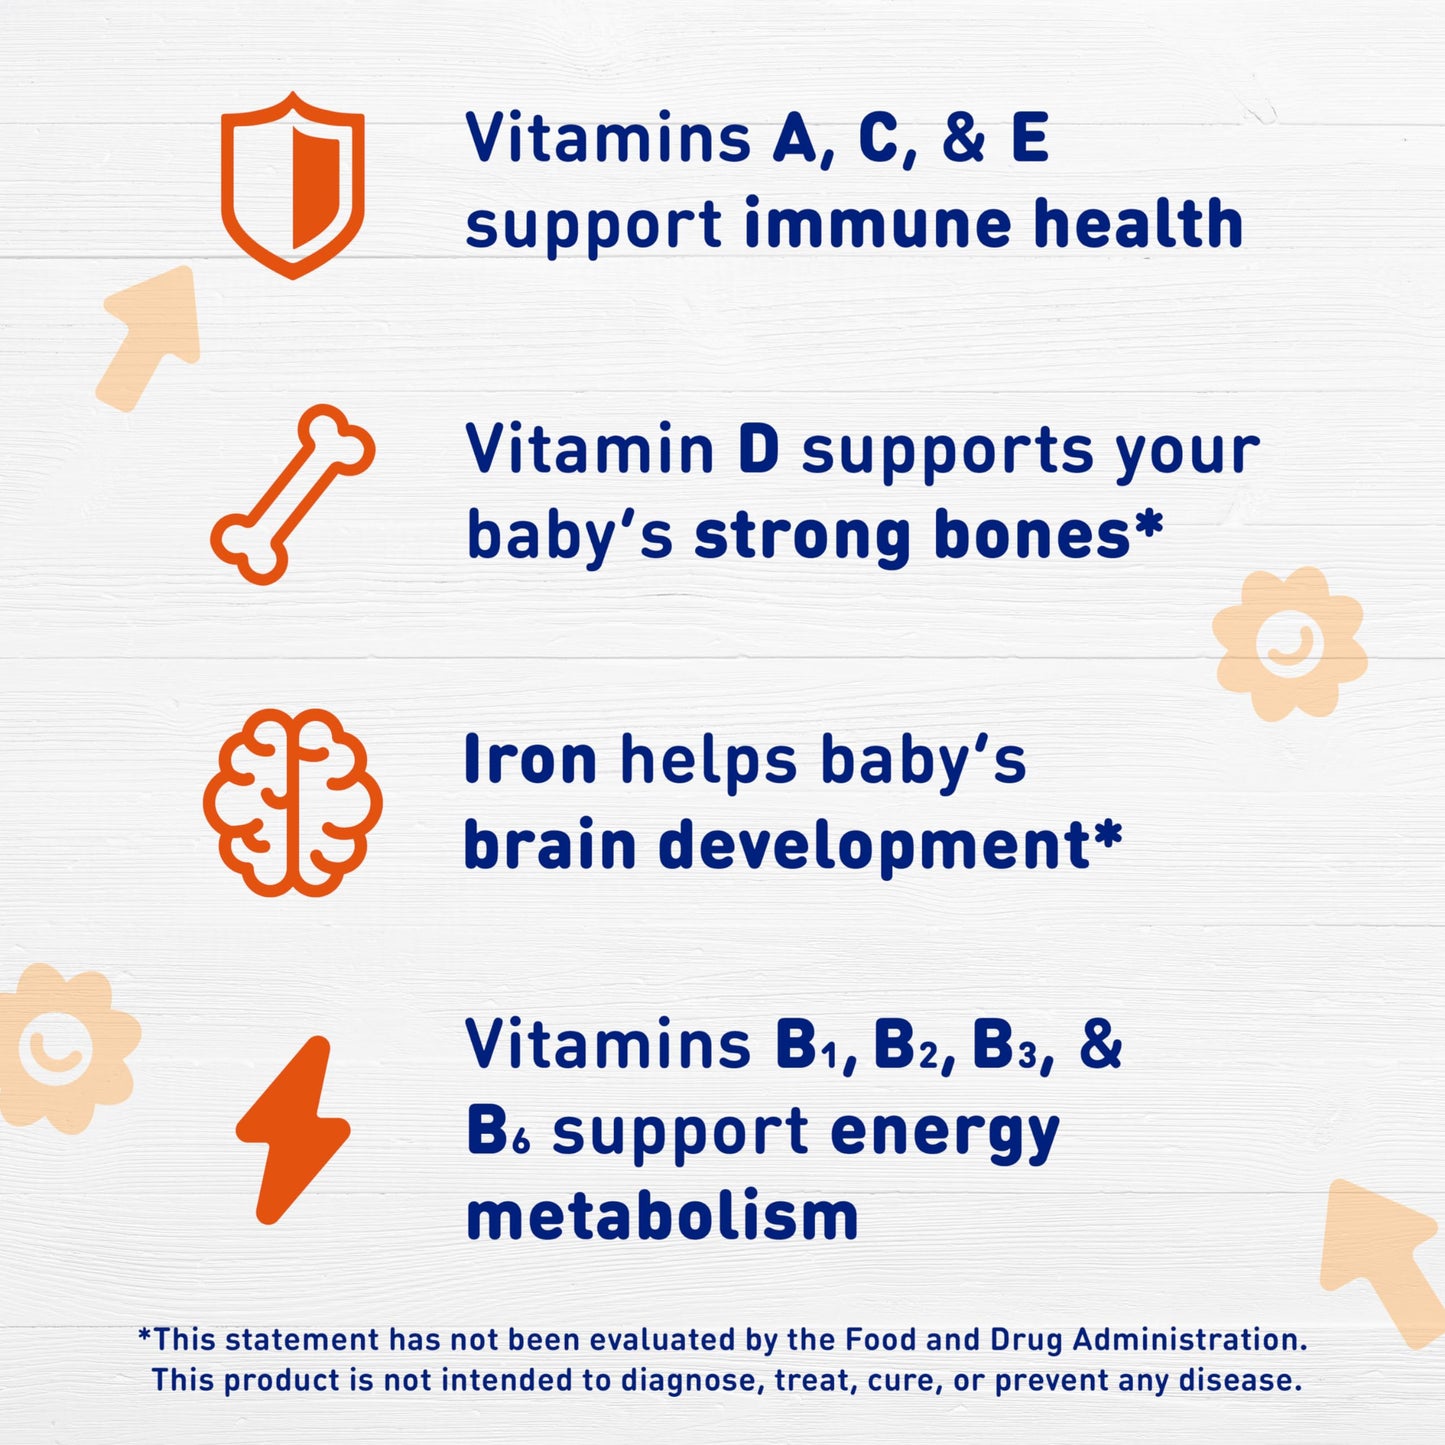 Enfamil Baby Vitamin Poly-Vi-Sol with Iron Multivitamin Supplement Drops for Infants and Toddlers, 50 mL dropper Bottle